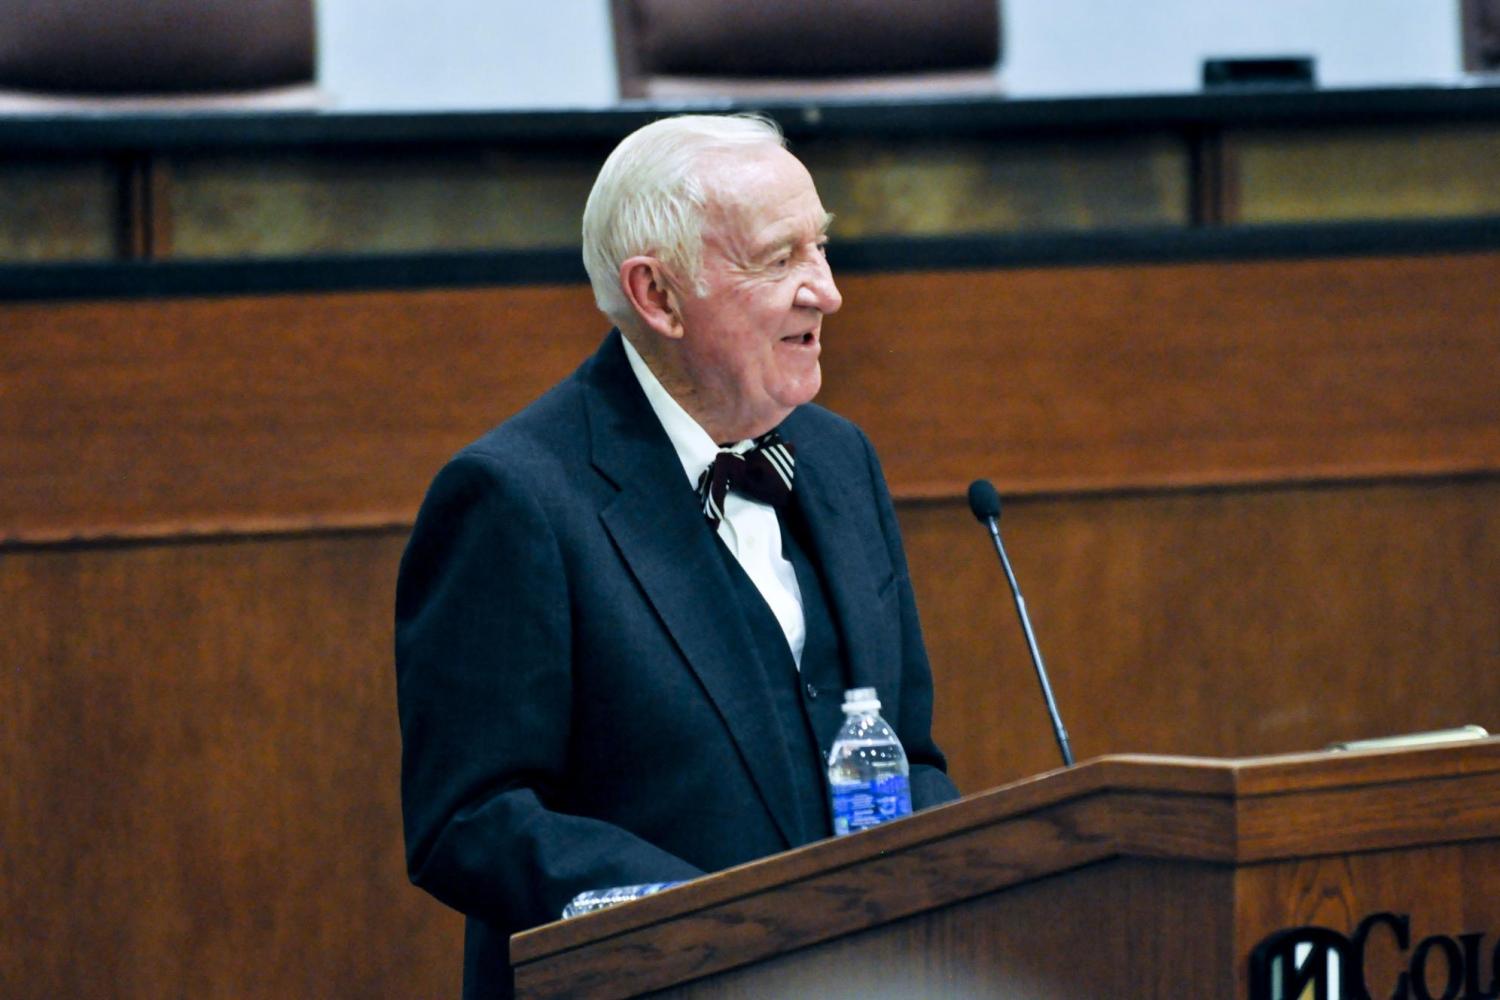 Inaugural Lecture with Justice John Paul Stevens